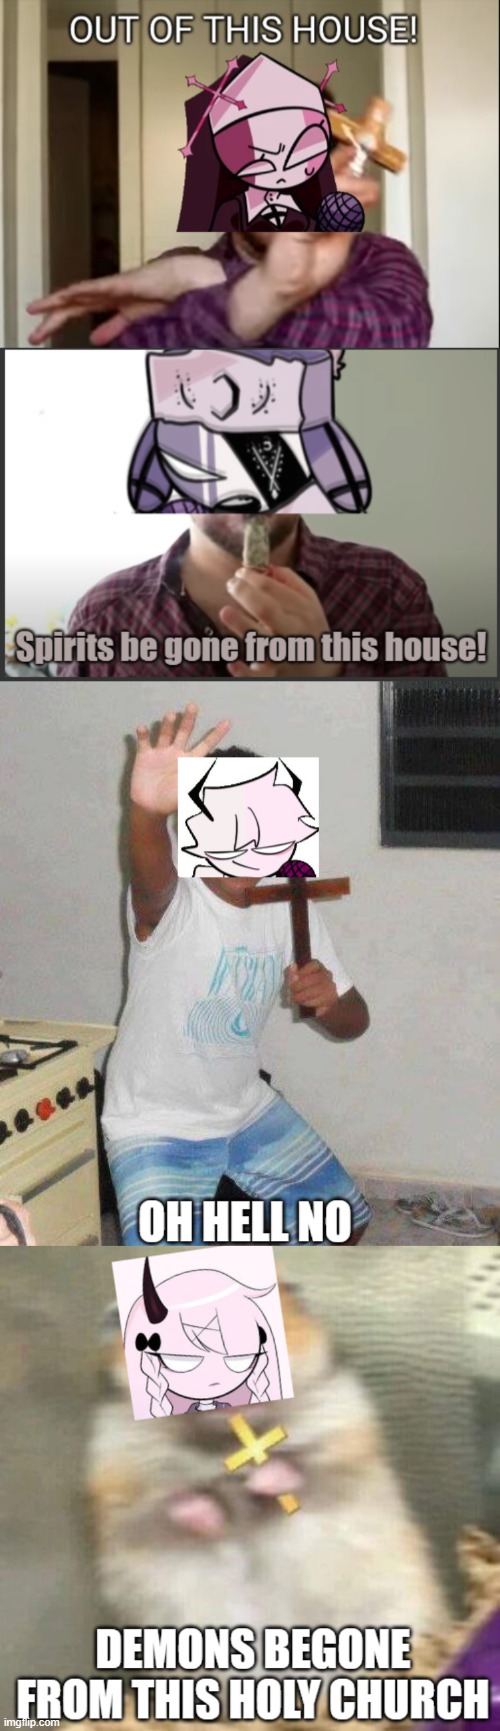 image tagged in sarvente out of this house,ruv spirits be gone,selever oh hell no,razasy demons begone from this holy curch | made w/ Imgflip meme maker